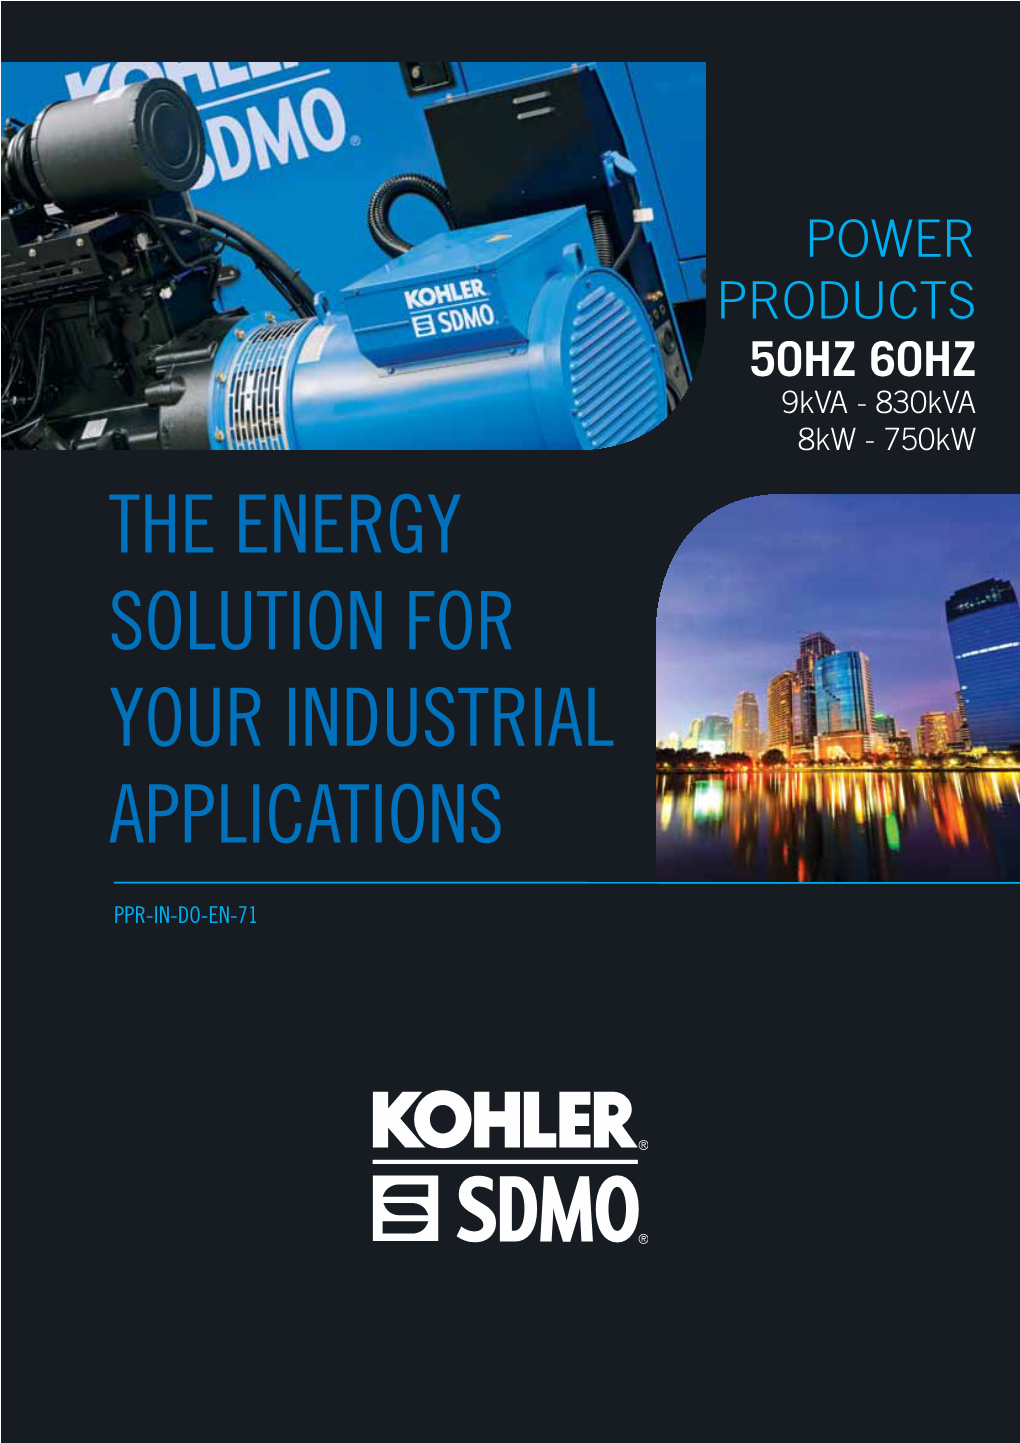 The Energy Solution for Your Industrial Applications